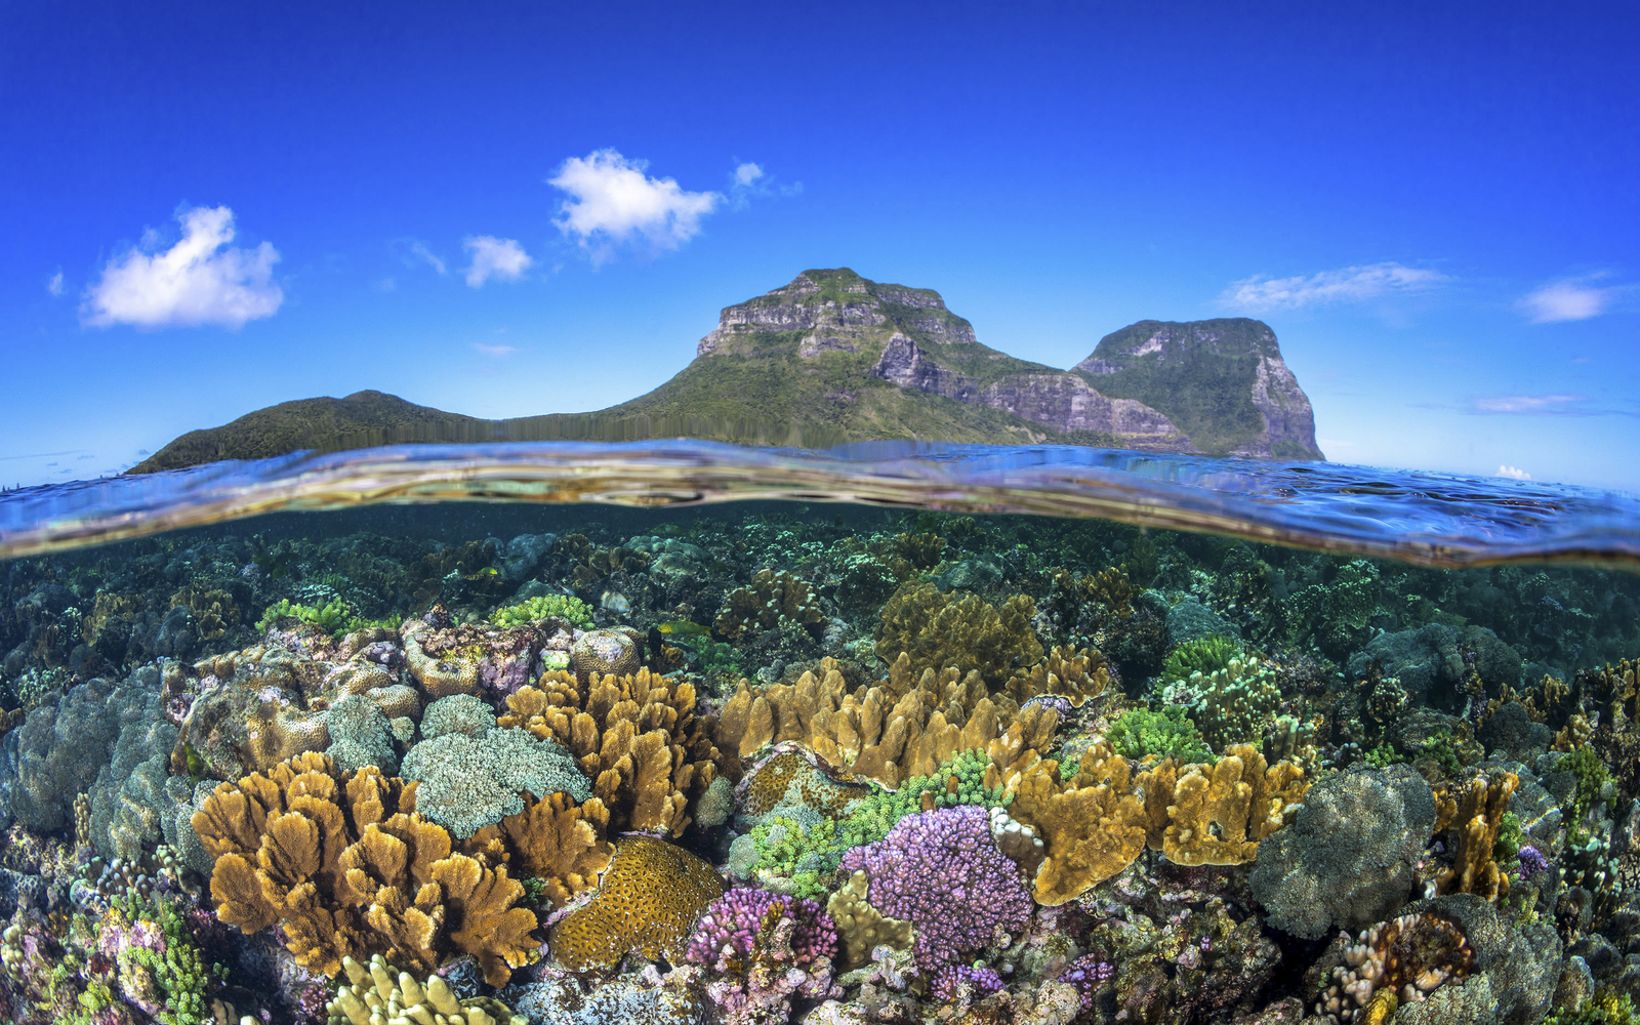 Lord Howe Island Islands are critical features of healthy marine ecosystems. Conservation on islands can provide important benefit for associated near-shore systems, like coral reefs.  © Jordan Robins/TNC Photo Contest 2019